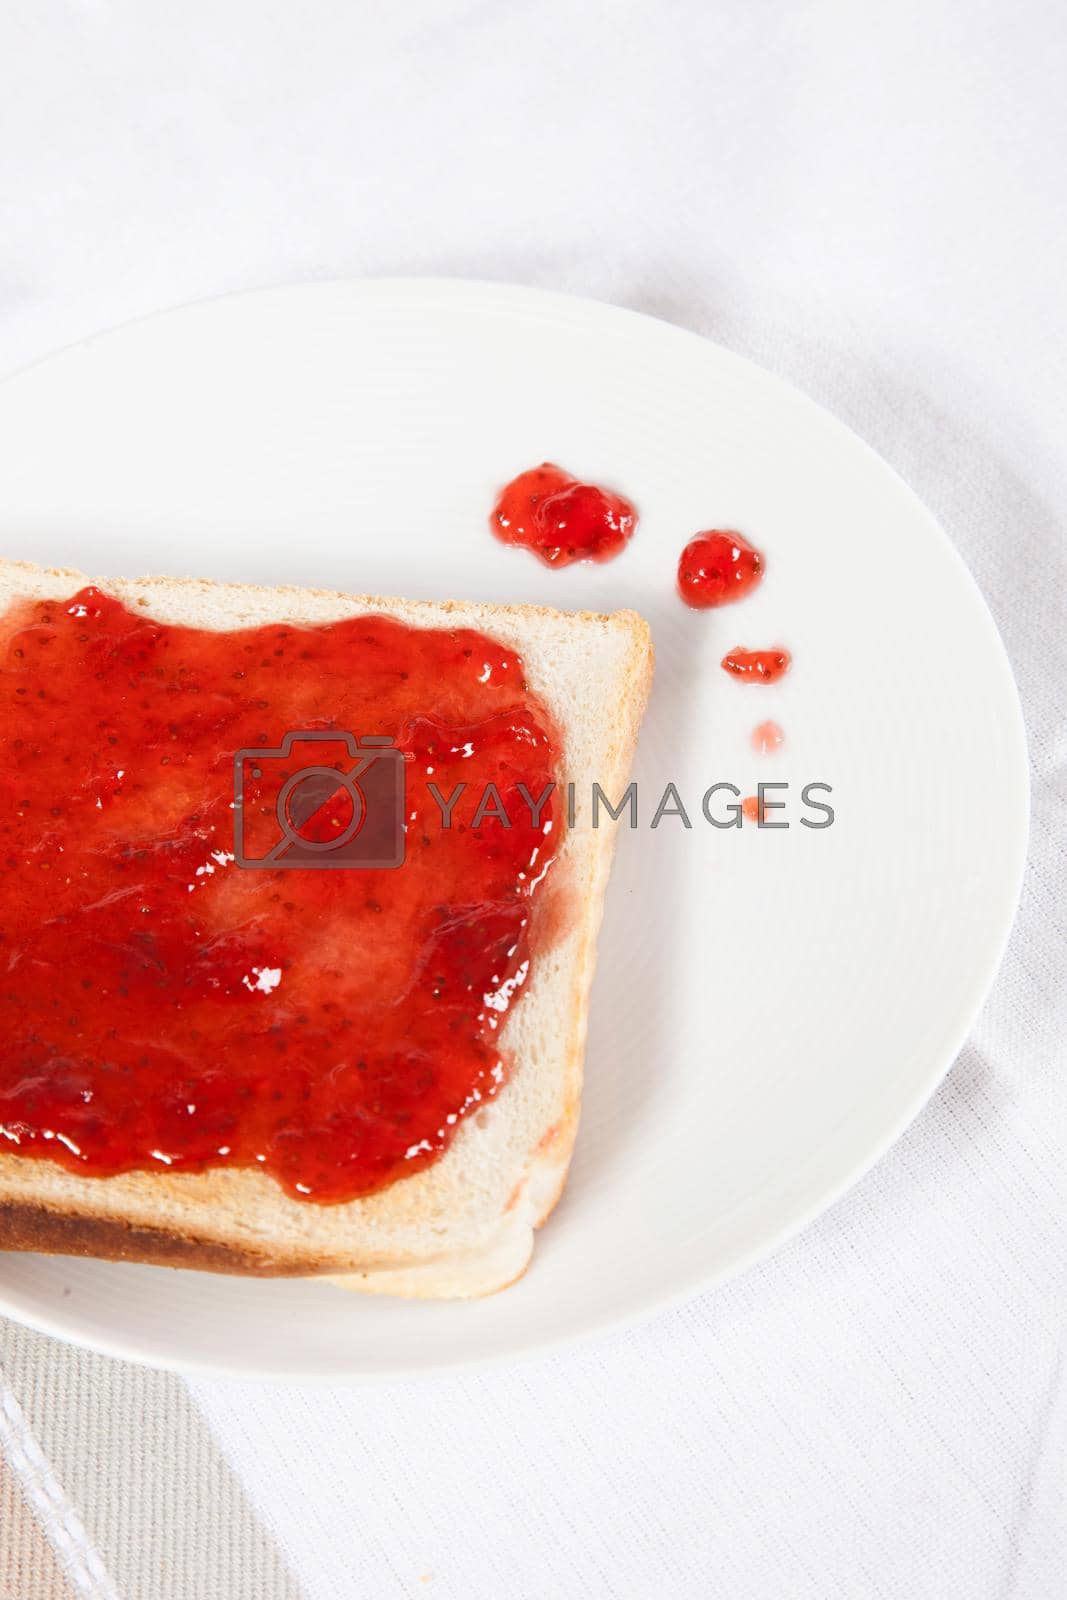 Royalty free image of Spilled strawberry jam jelly on toast by moodboard